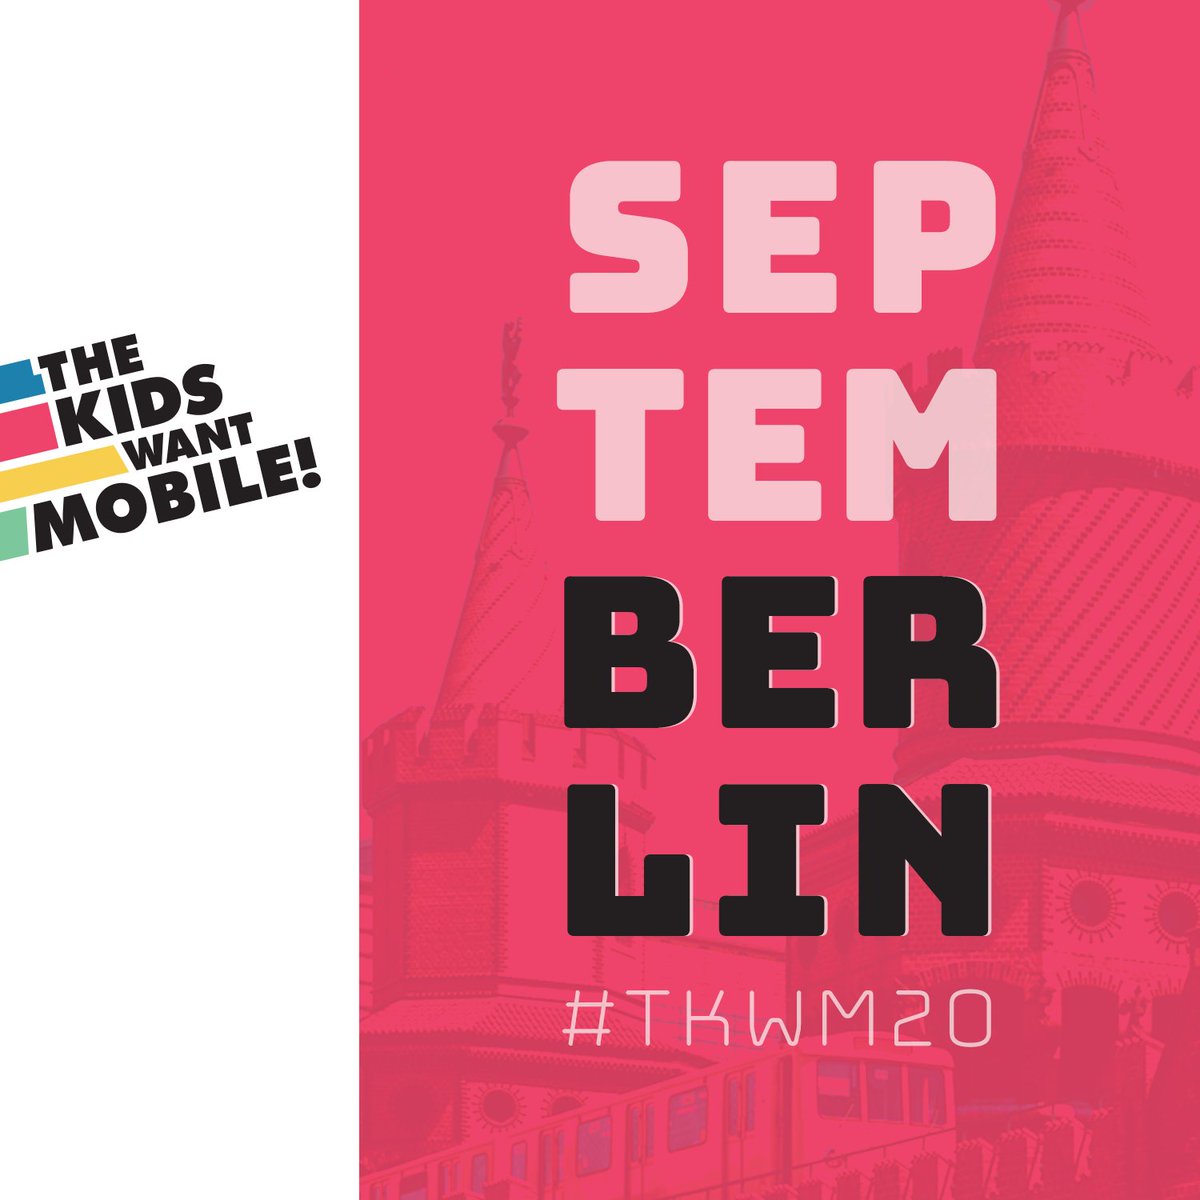 THE KIDS WANT MOBILE will be back in September 2020. We have a lot of cool things in the planning and cannot wait to tell you more about it.